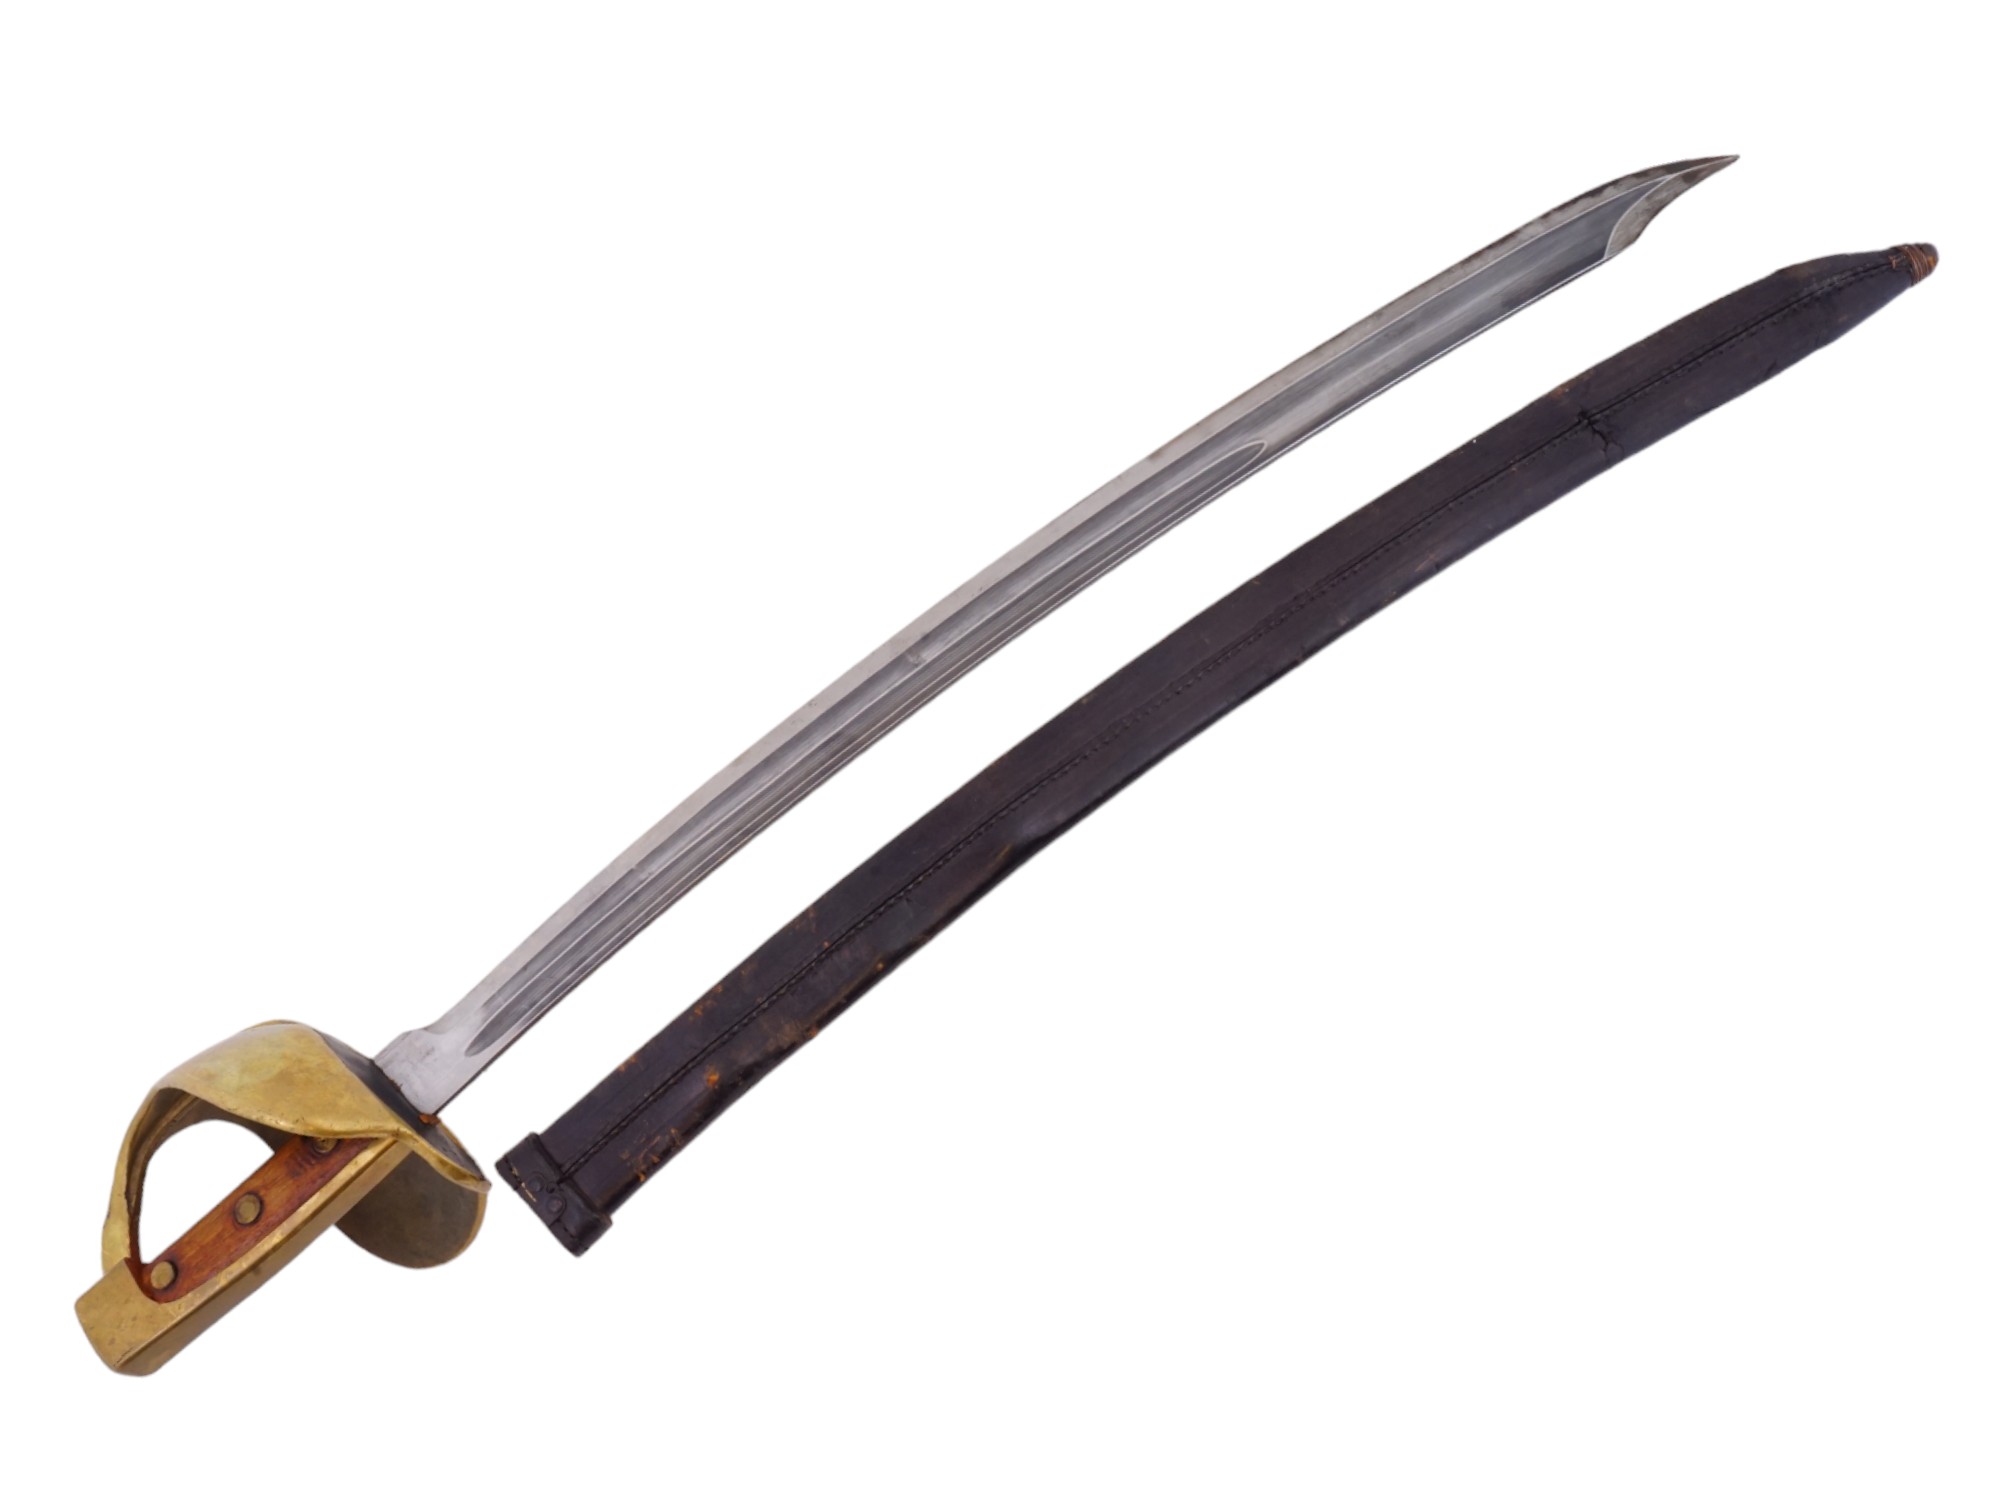 CUTLASS SABER 5617 WITH BRASS CLOSED GUARD PIC-1